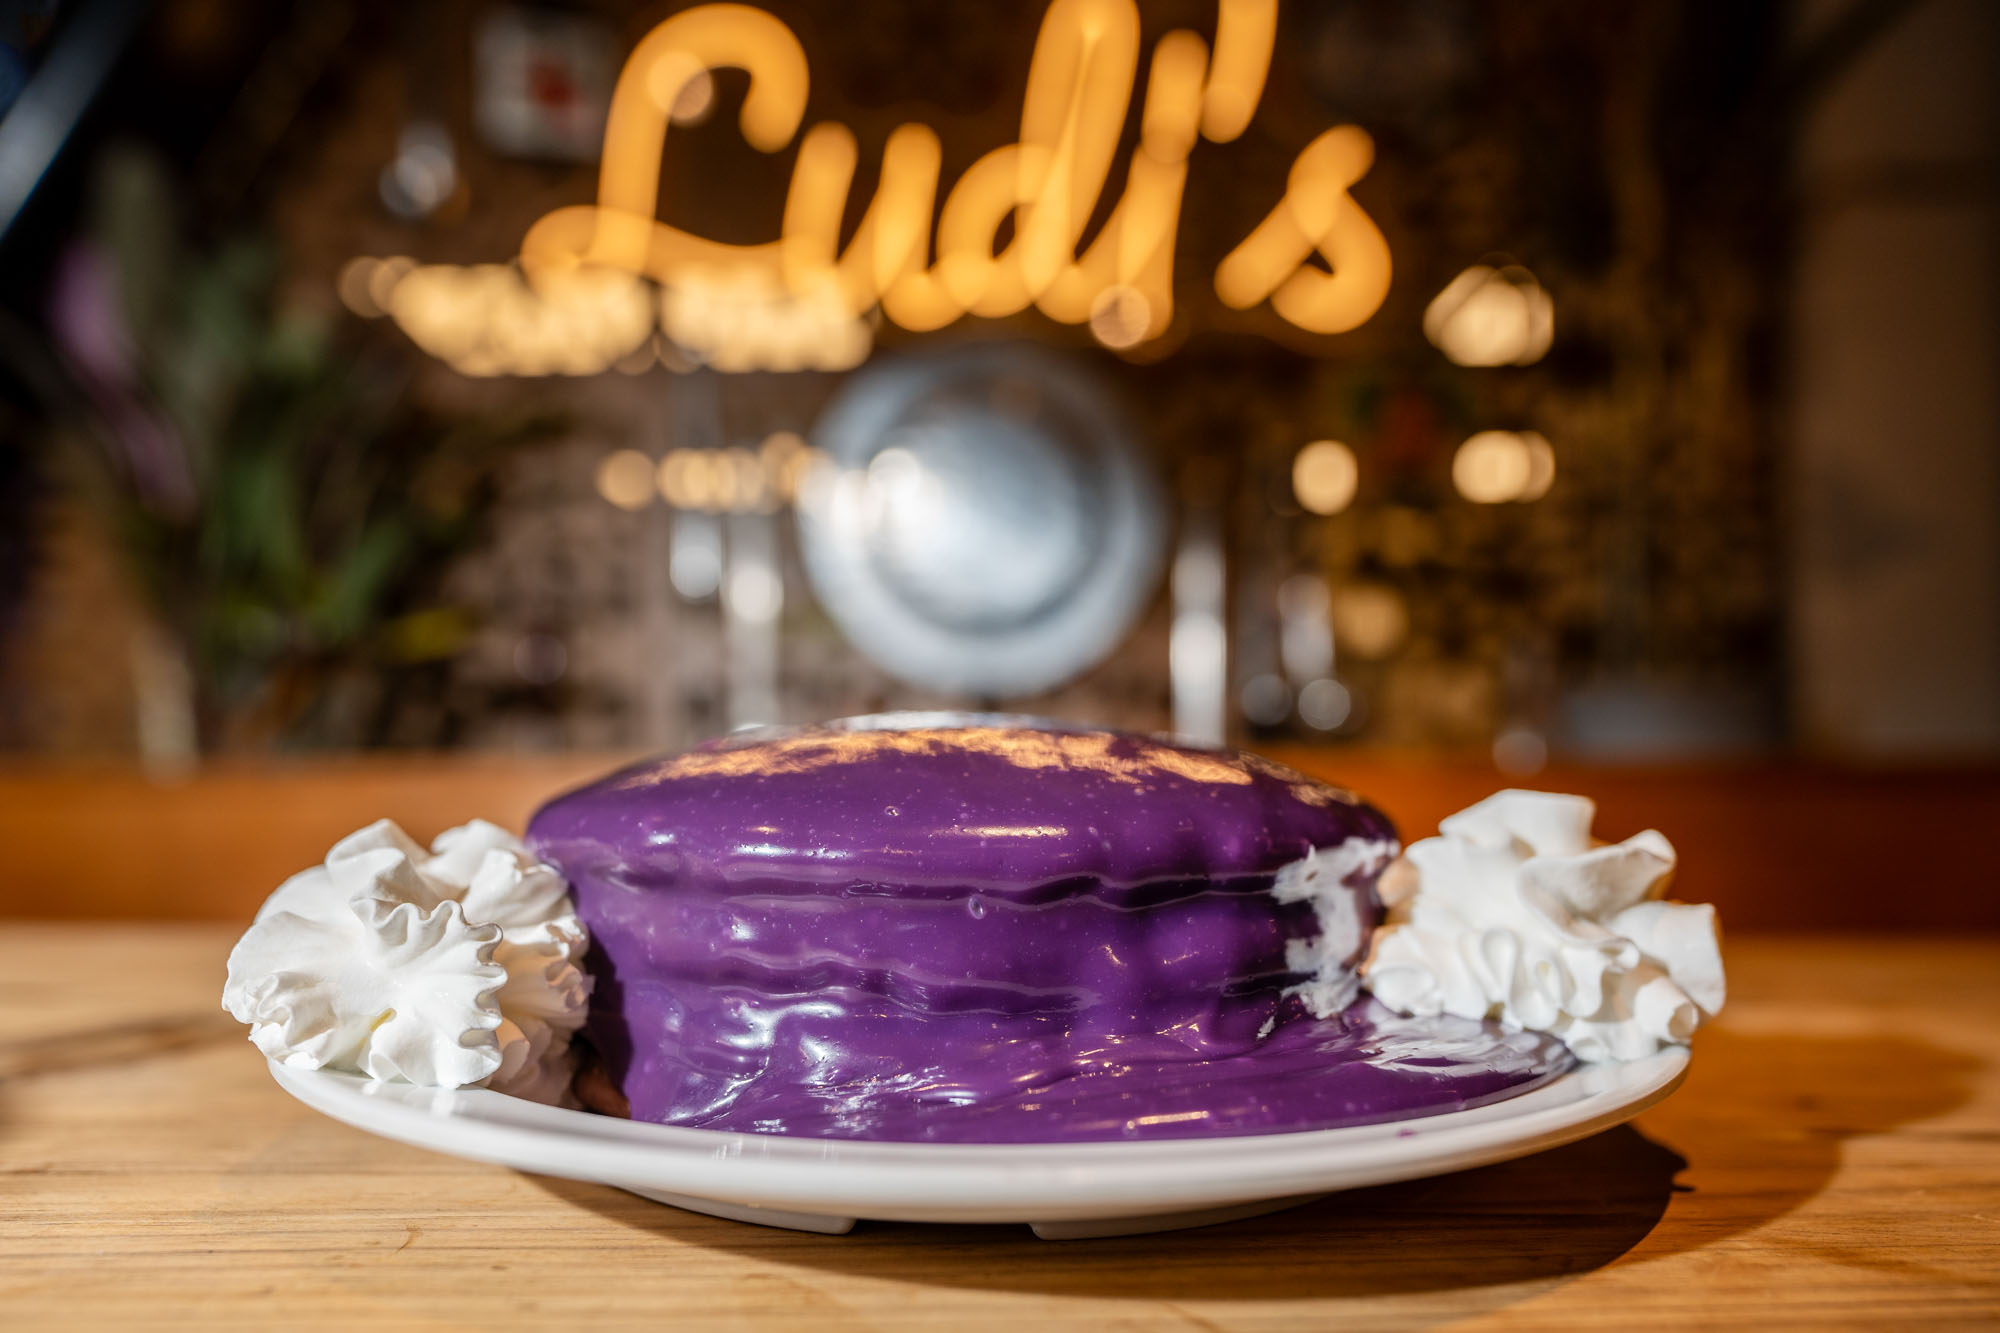 A plate of pancakes covered in bright purple ube sauce under a neon sign that says “Ludi’s.”